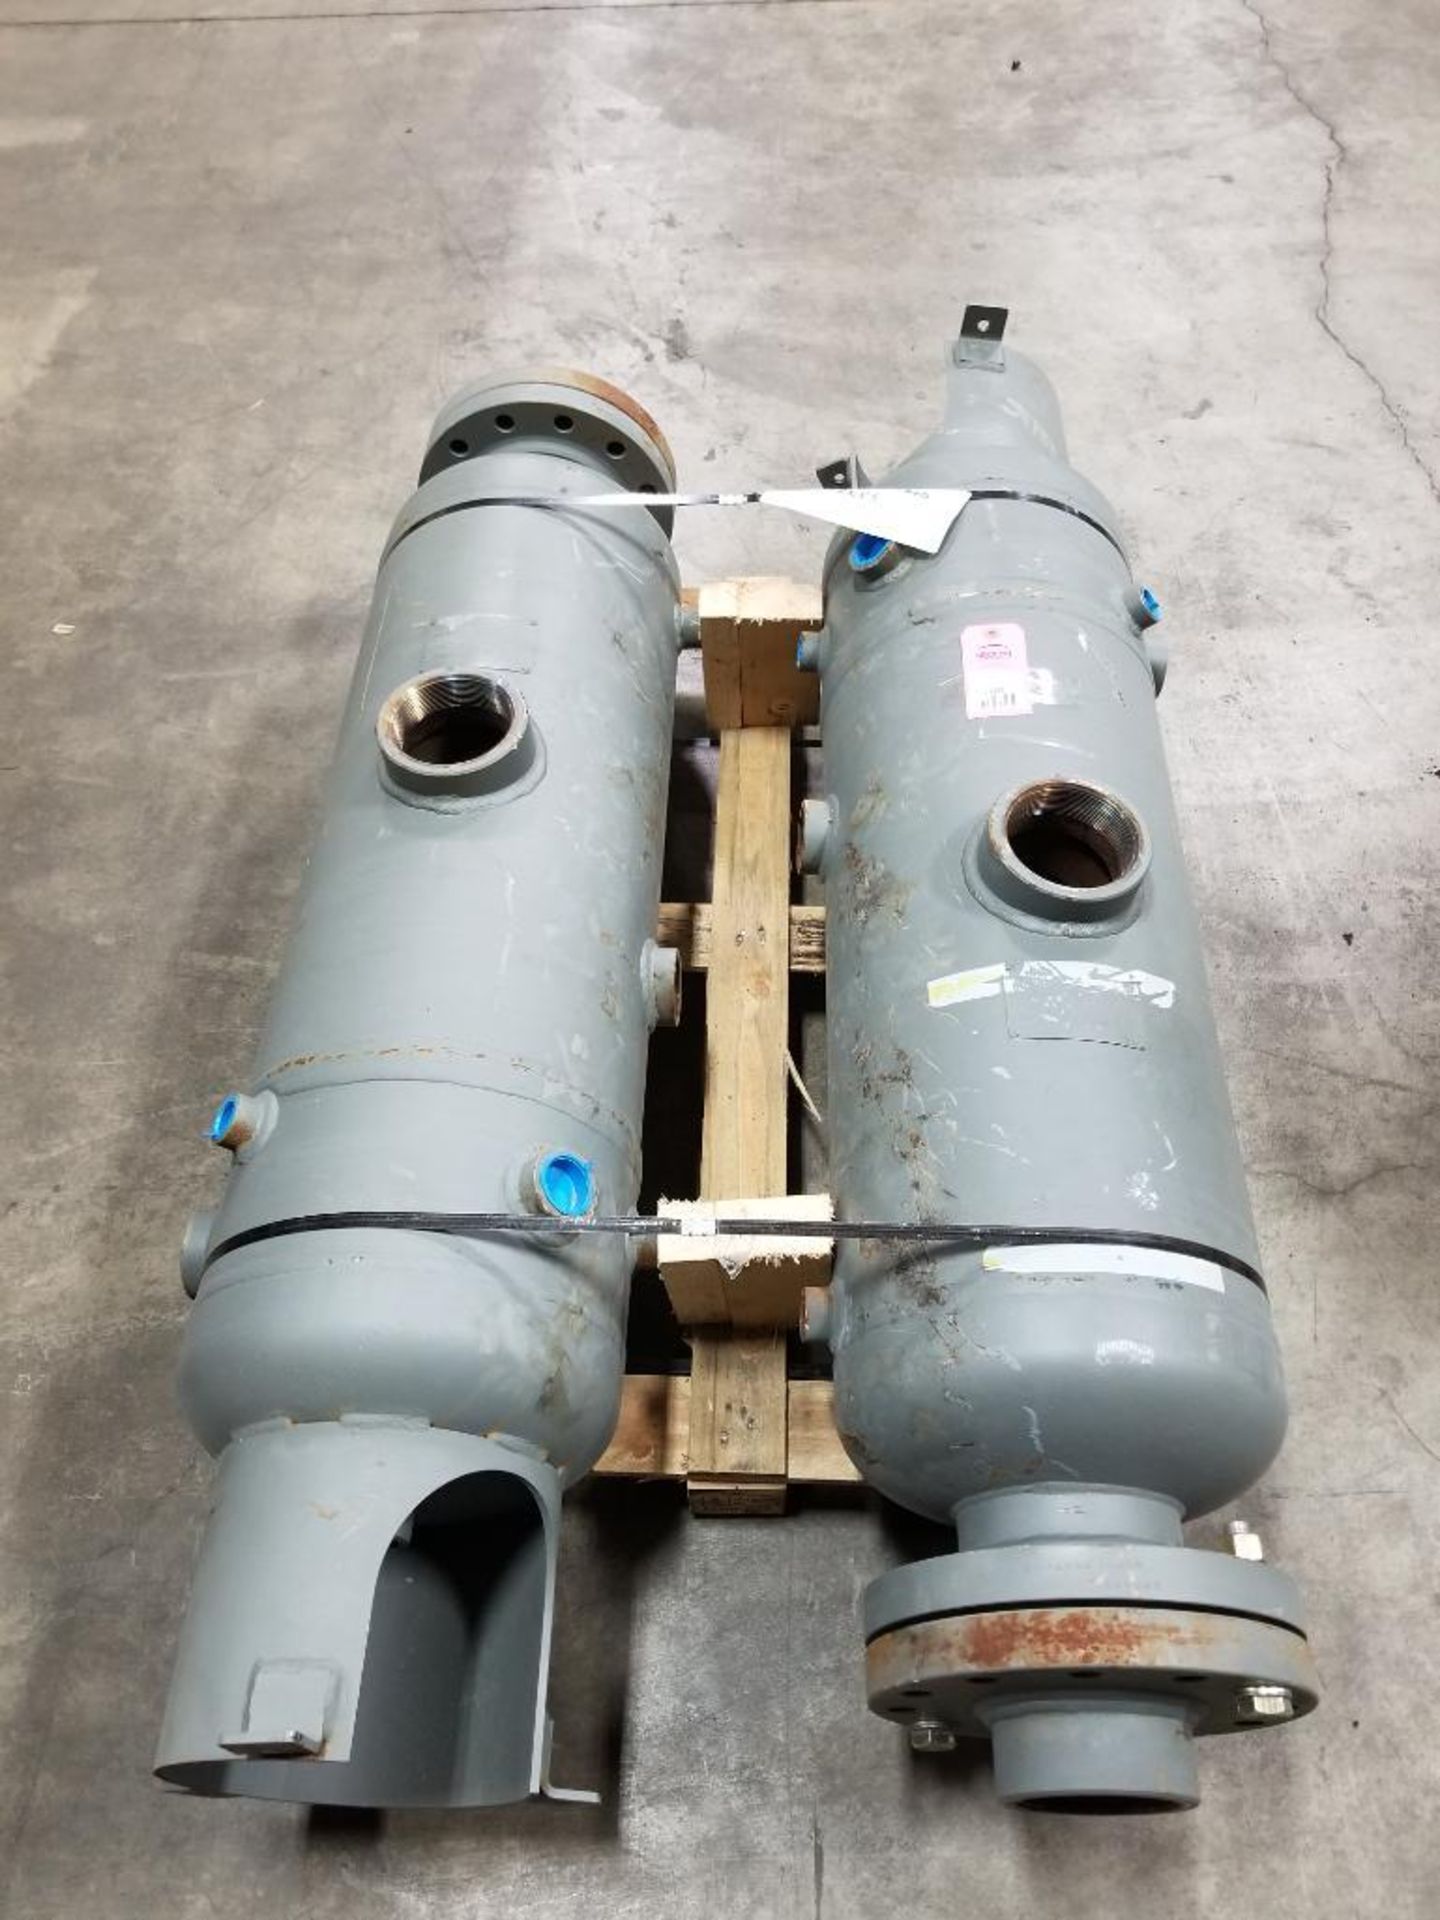 Qty 2 - LaGrange Products INC. 1444-4993 375 PSI certified tanks.